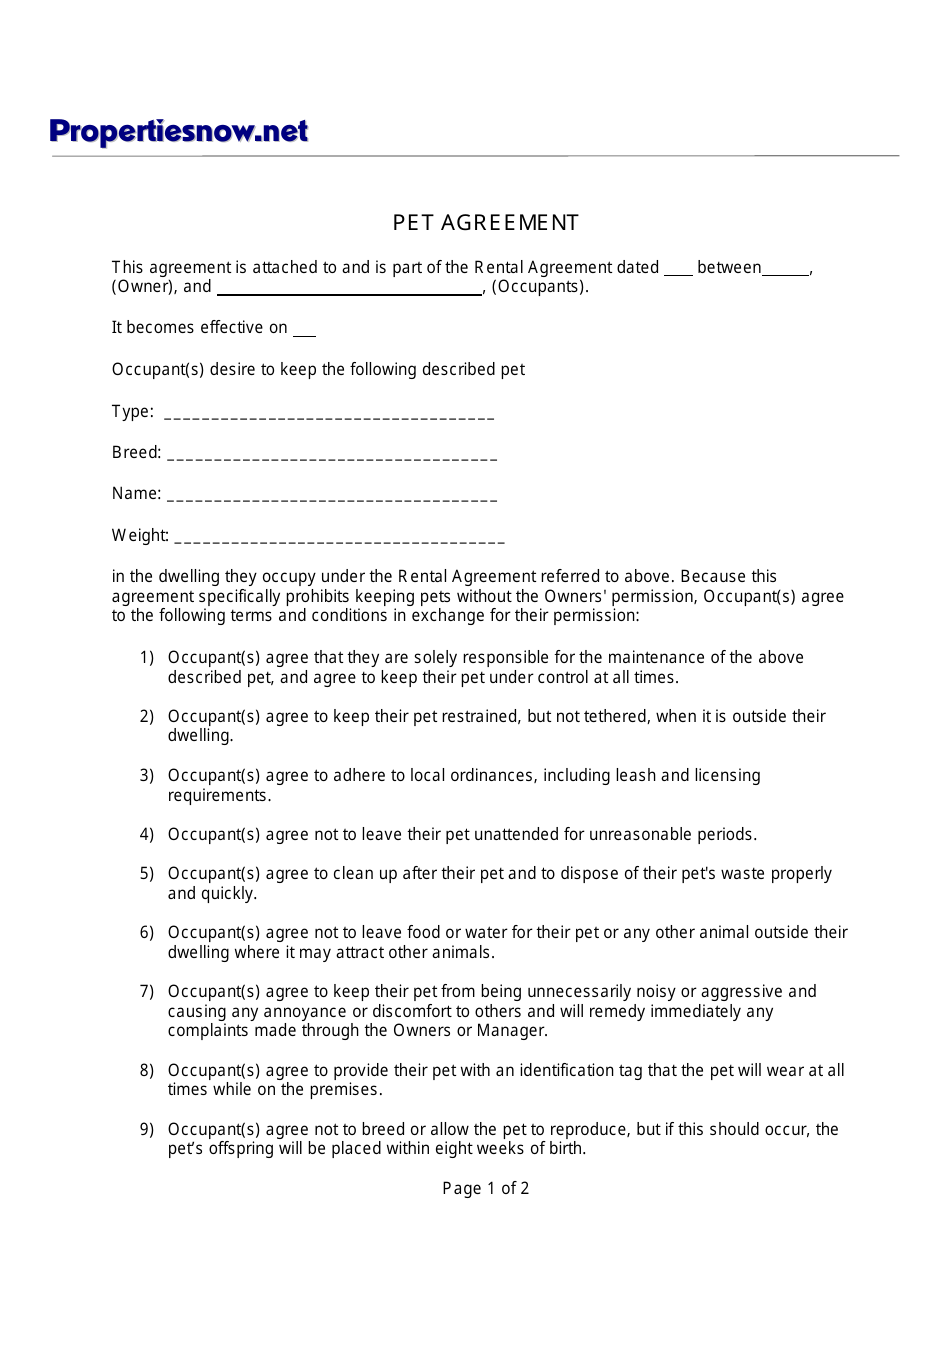 Pet Agreement Form - Seventeen Points, Page 1